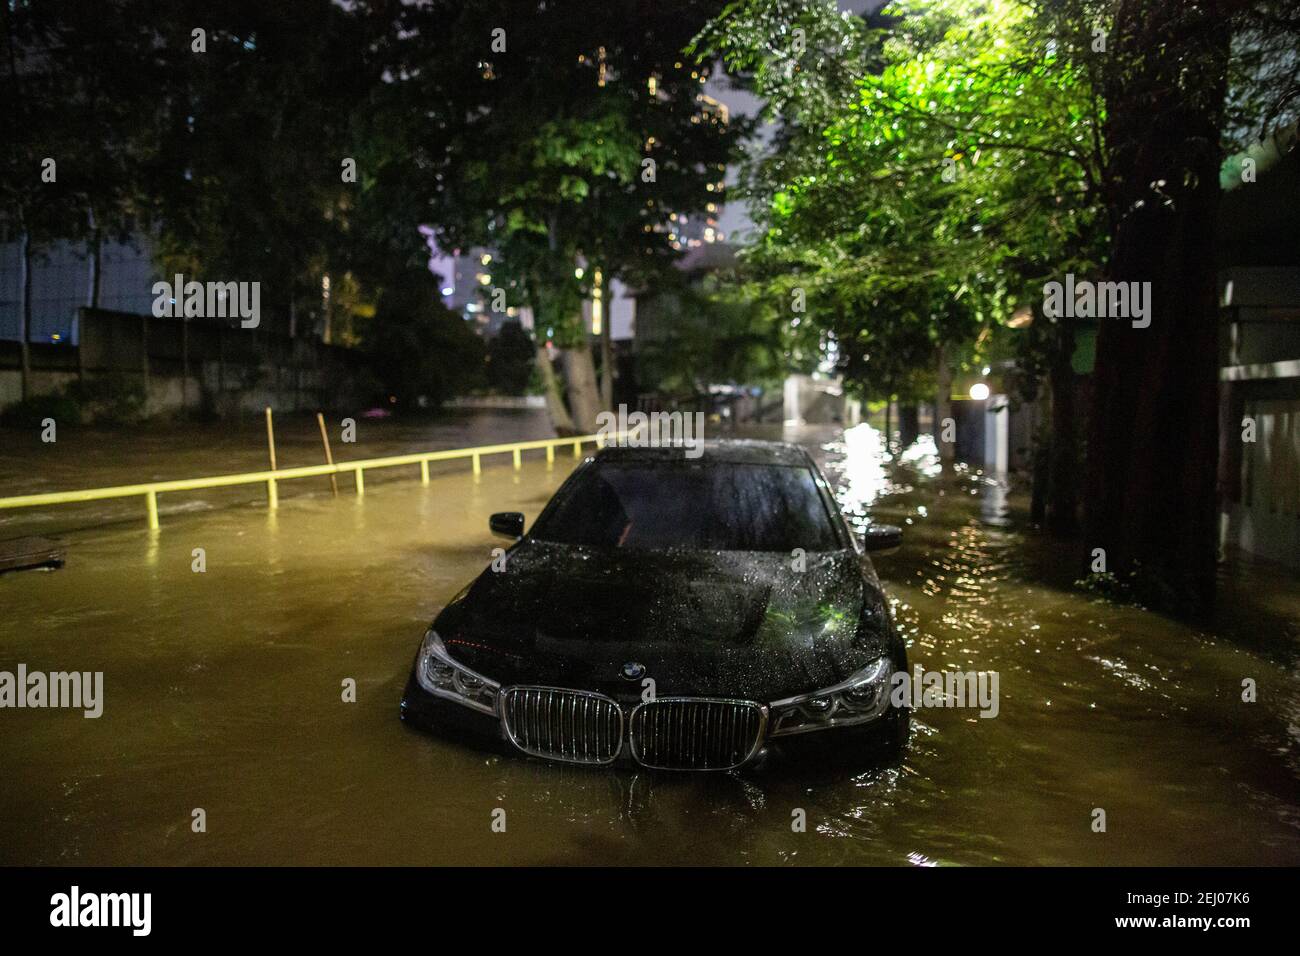 Jakarta, Jakarta, Indonesia. 20th Feb, 2021. A view of inundated car during a flood following heavy rains at business district in Jakarta, Indonesia on February 20, 2021. At least 21 areas in the Indonesian capital were hit by floods Saturday following heavy rains, during which thousands of homes were also damaged, according to the National Board for Disaster Management Credit: Afriadi Hikmal/ZUMA Wire/Alamy Live News Stock Photo